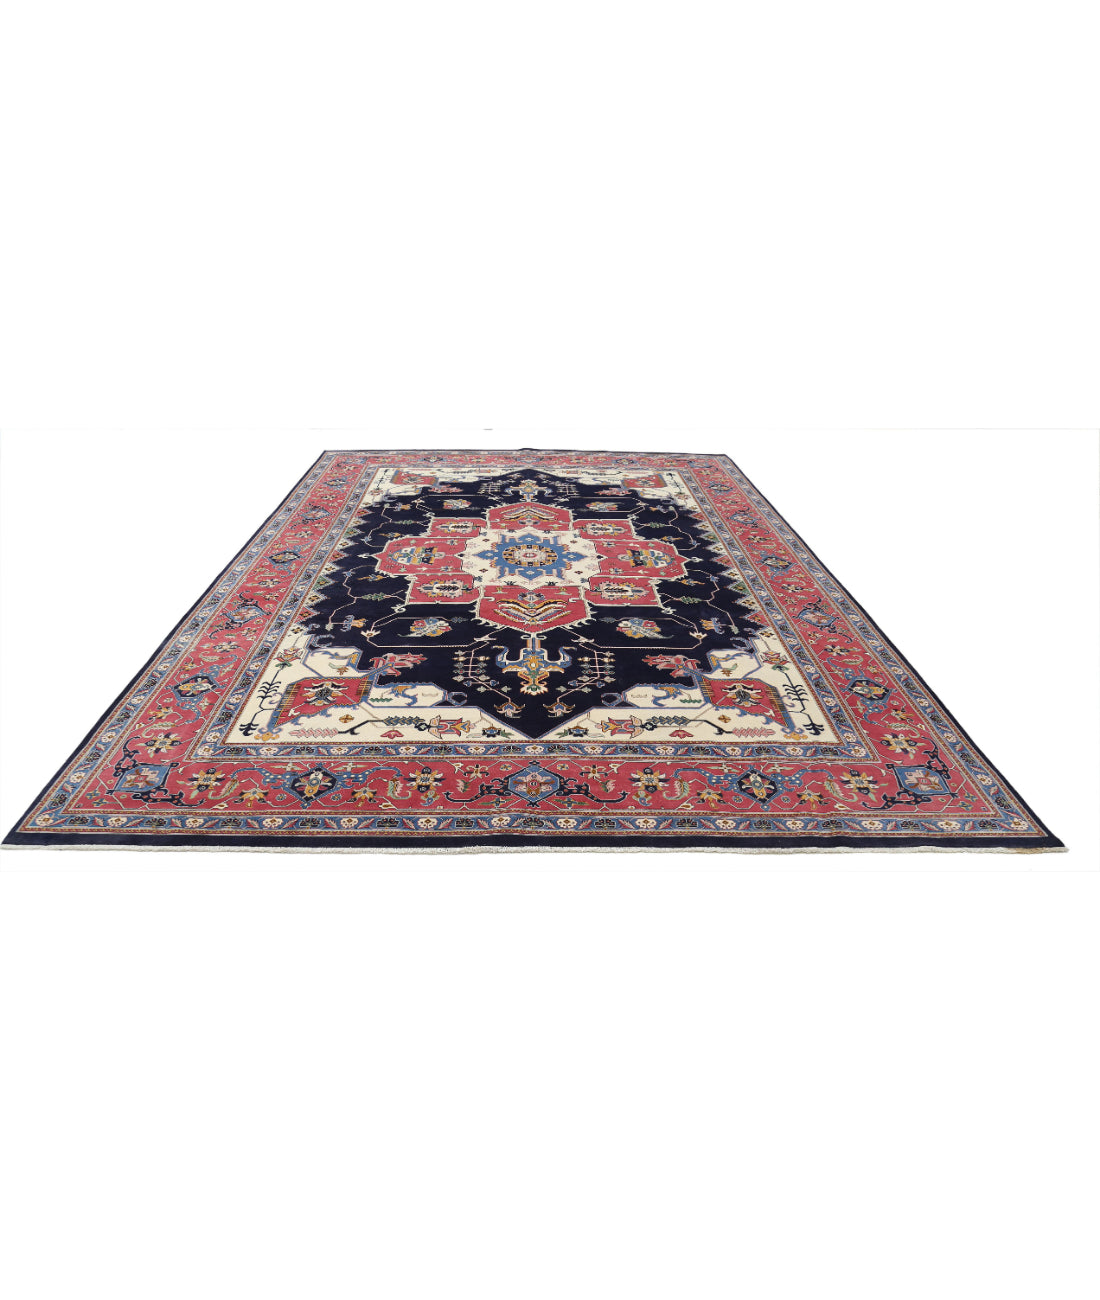 Hand Knotted Heriz Fine Persian Style Wool Rug - 9'11'' x 14'6'' 9'11'' x 14'6'' (298 X 435) / Blue / Pink